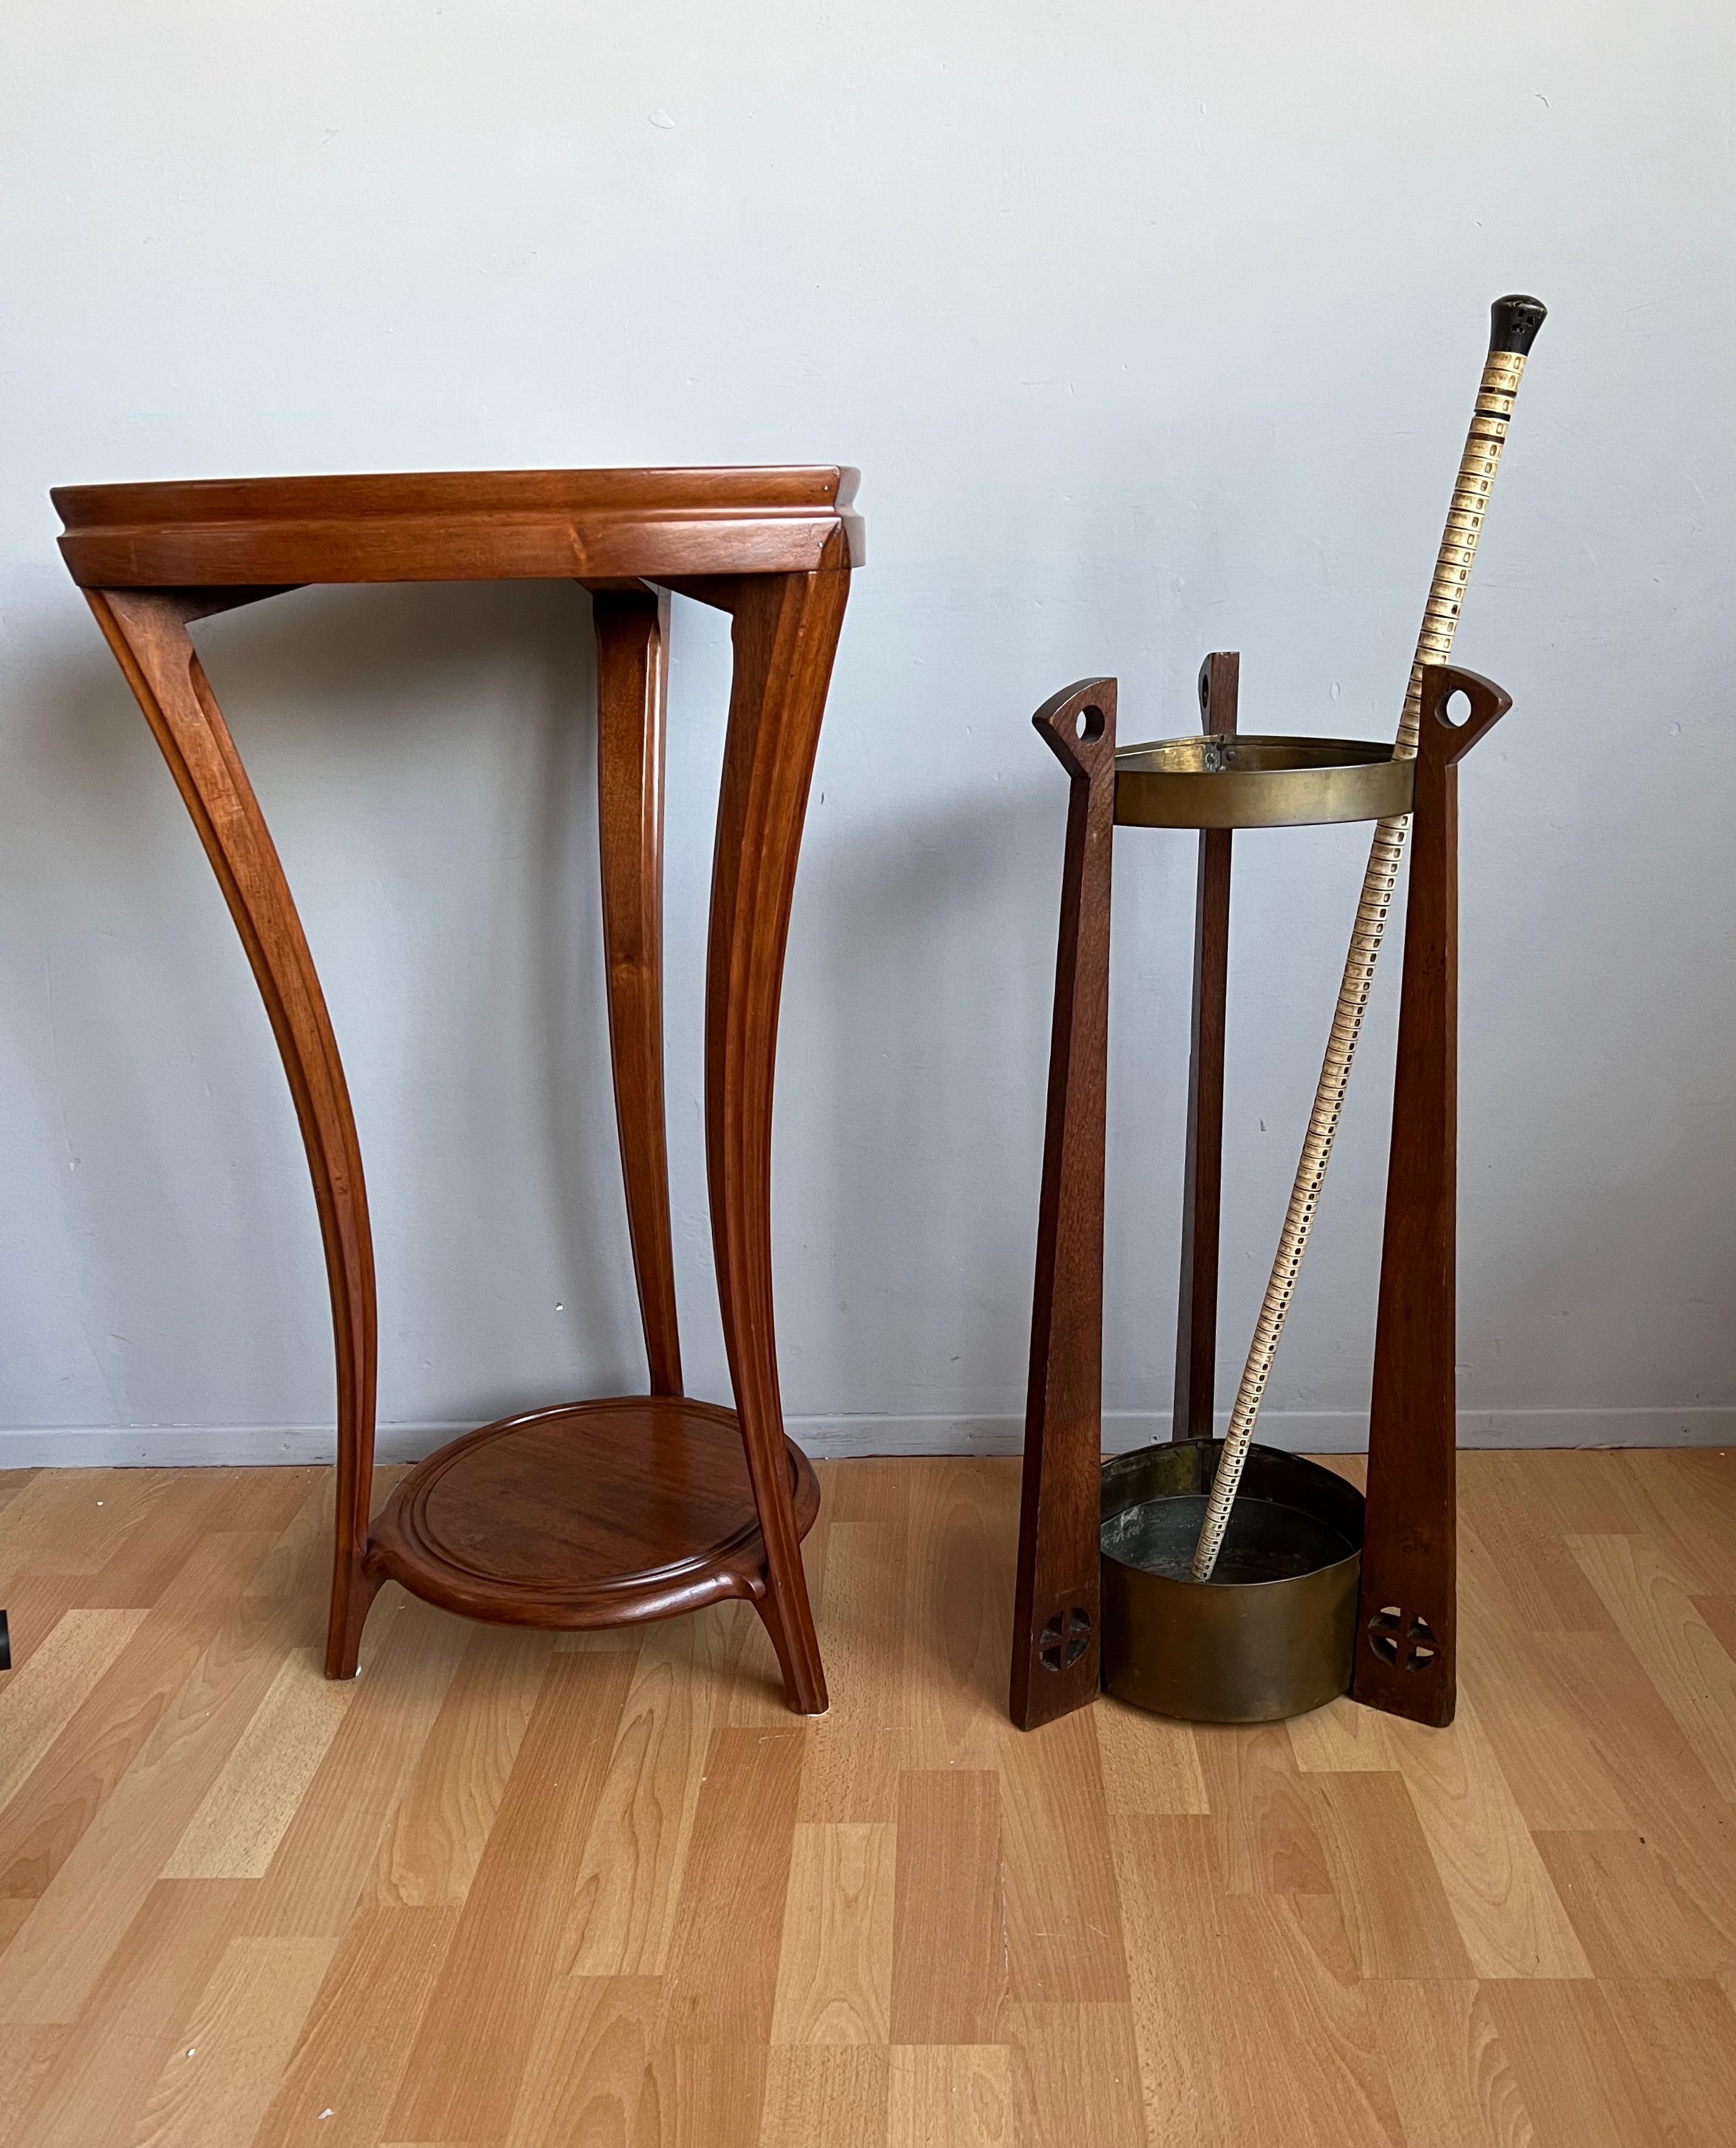 20th Century Gustave Serrurier-Bovy Brass and Oak Cane & Umbrella Stand with Zinc Liner For Sale